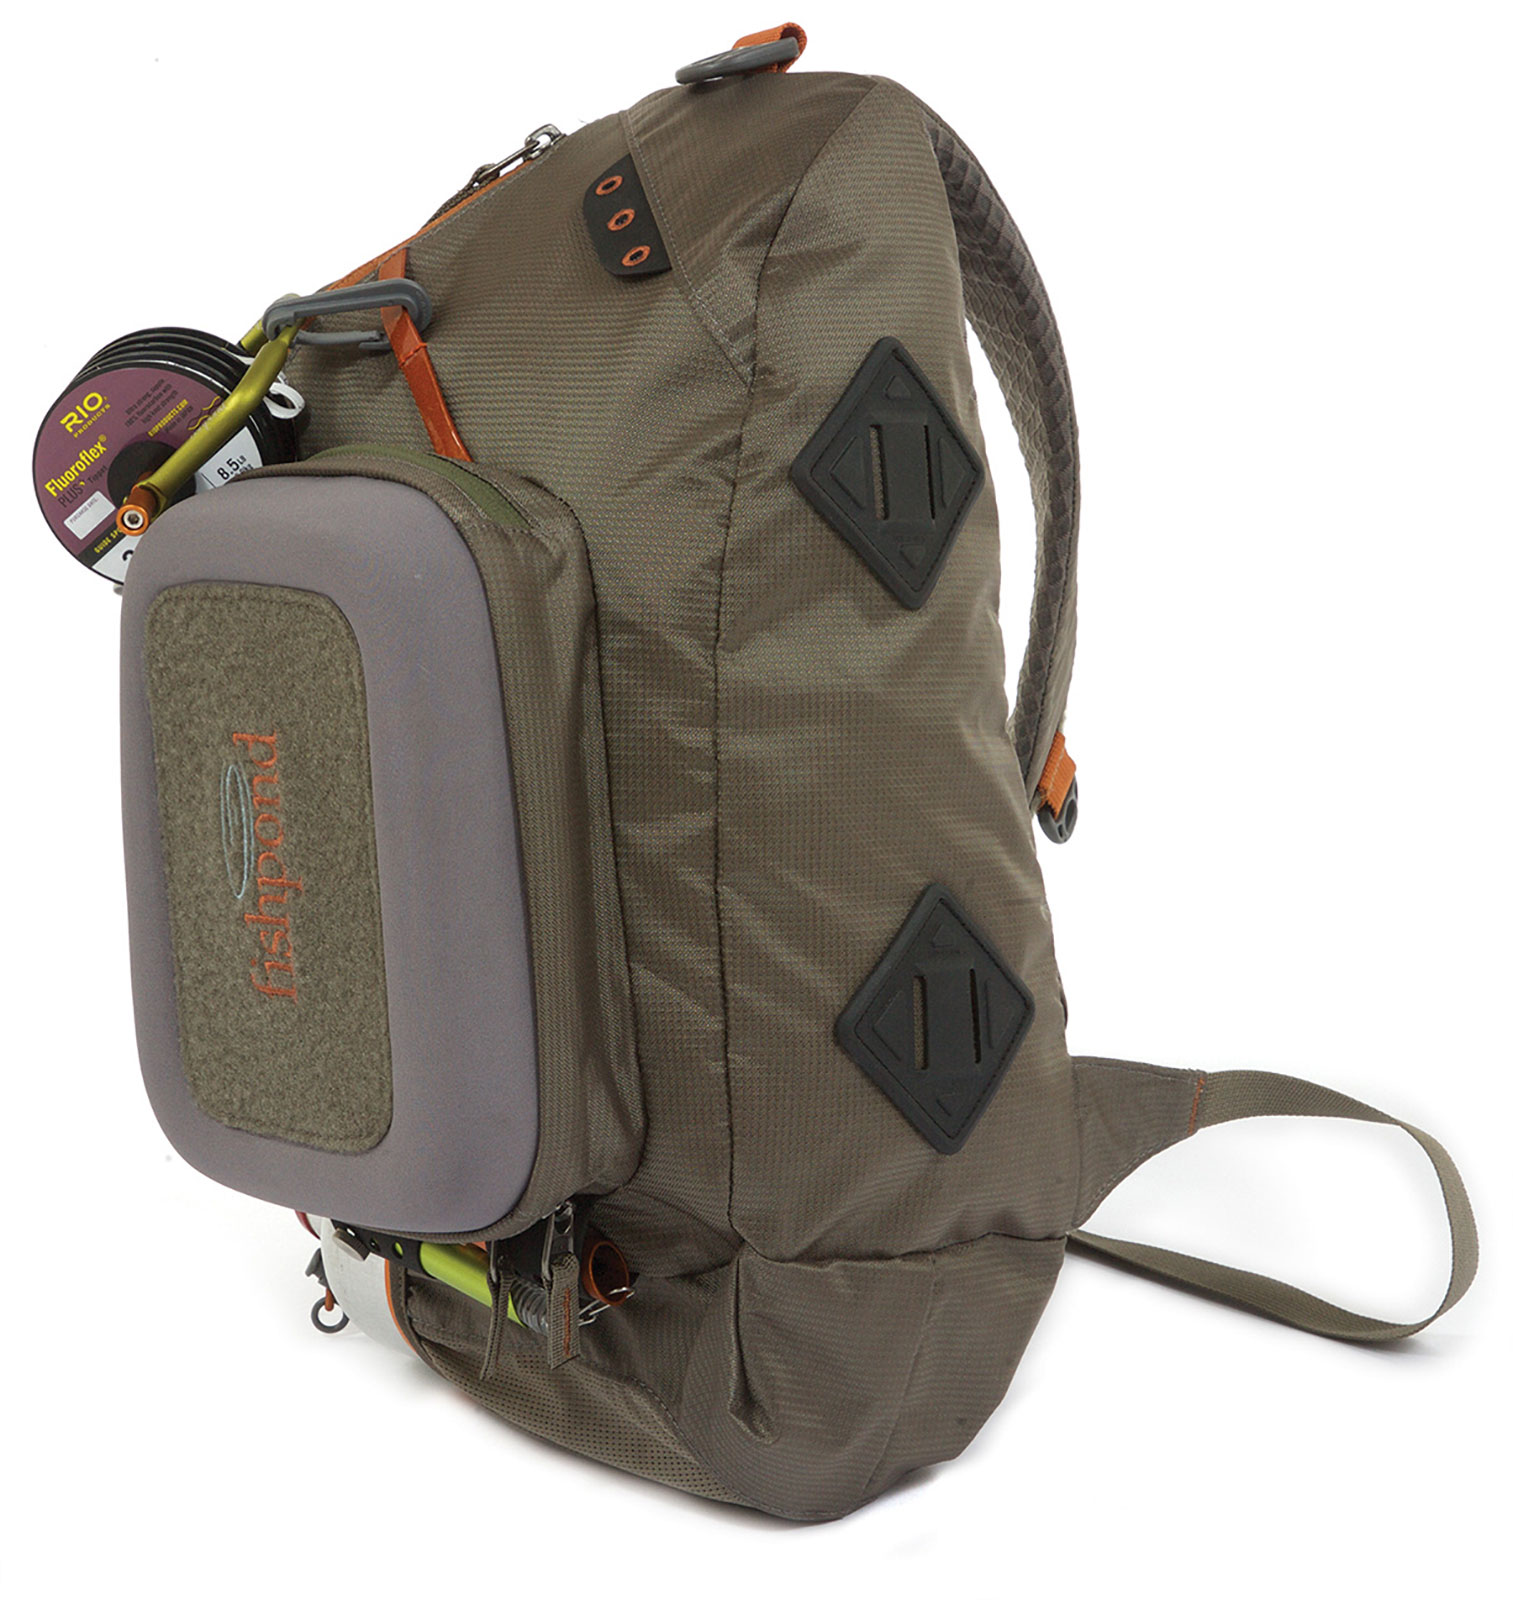 NEW FISHPOND SUMMIT SLING FLY FISHING PACK IN GRAVEL COLOR FREE US SHIPPING 